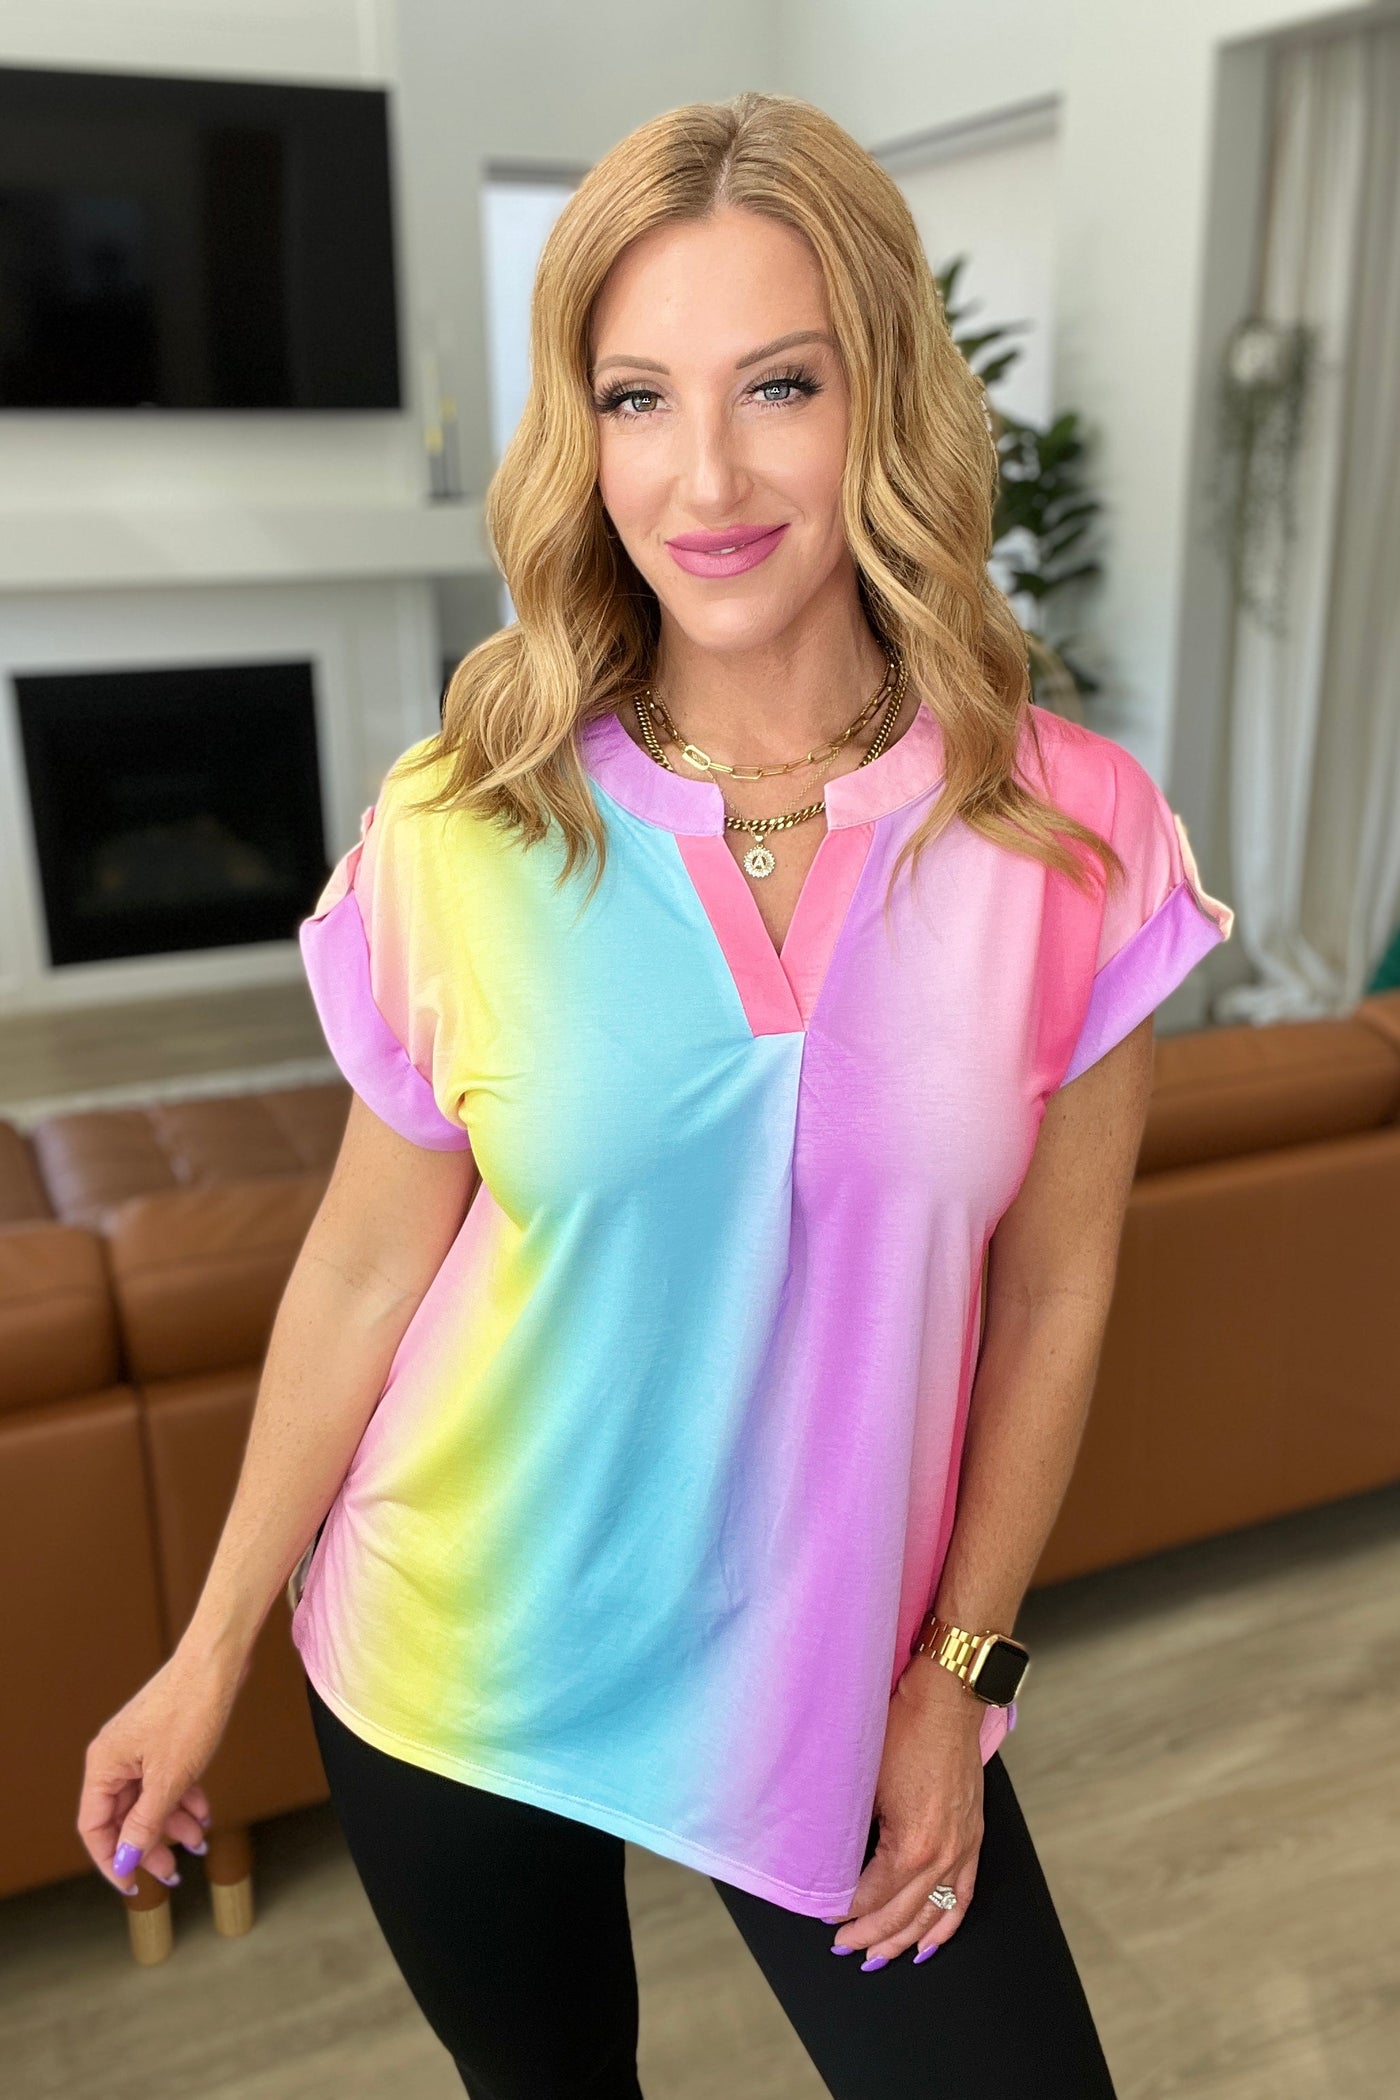 Lizzy Cap Sleeve Top in Ombre Rainbow-Tops-Ave Shops-Market Street Nest, Fashionable Clothing, Shoes and Home Décor Located in Mabank, TX